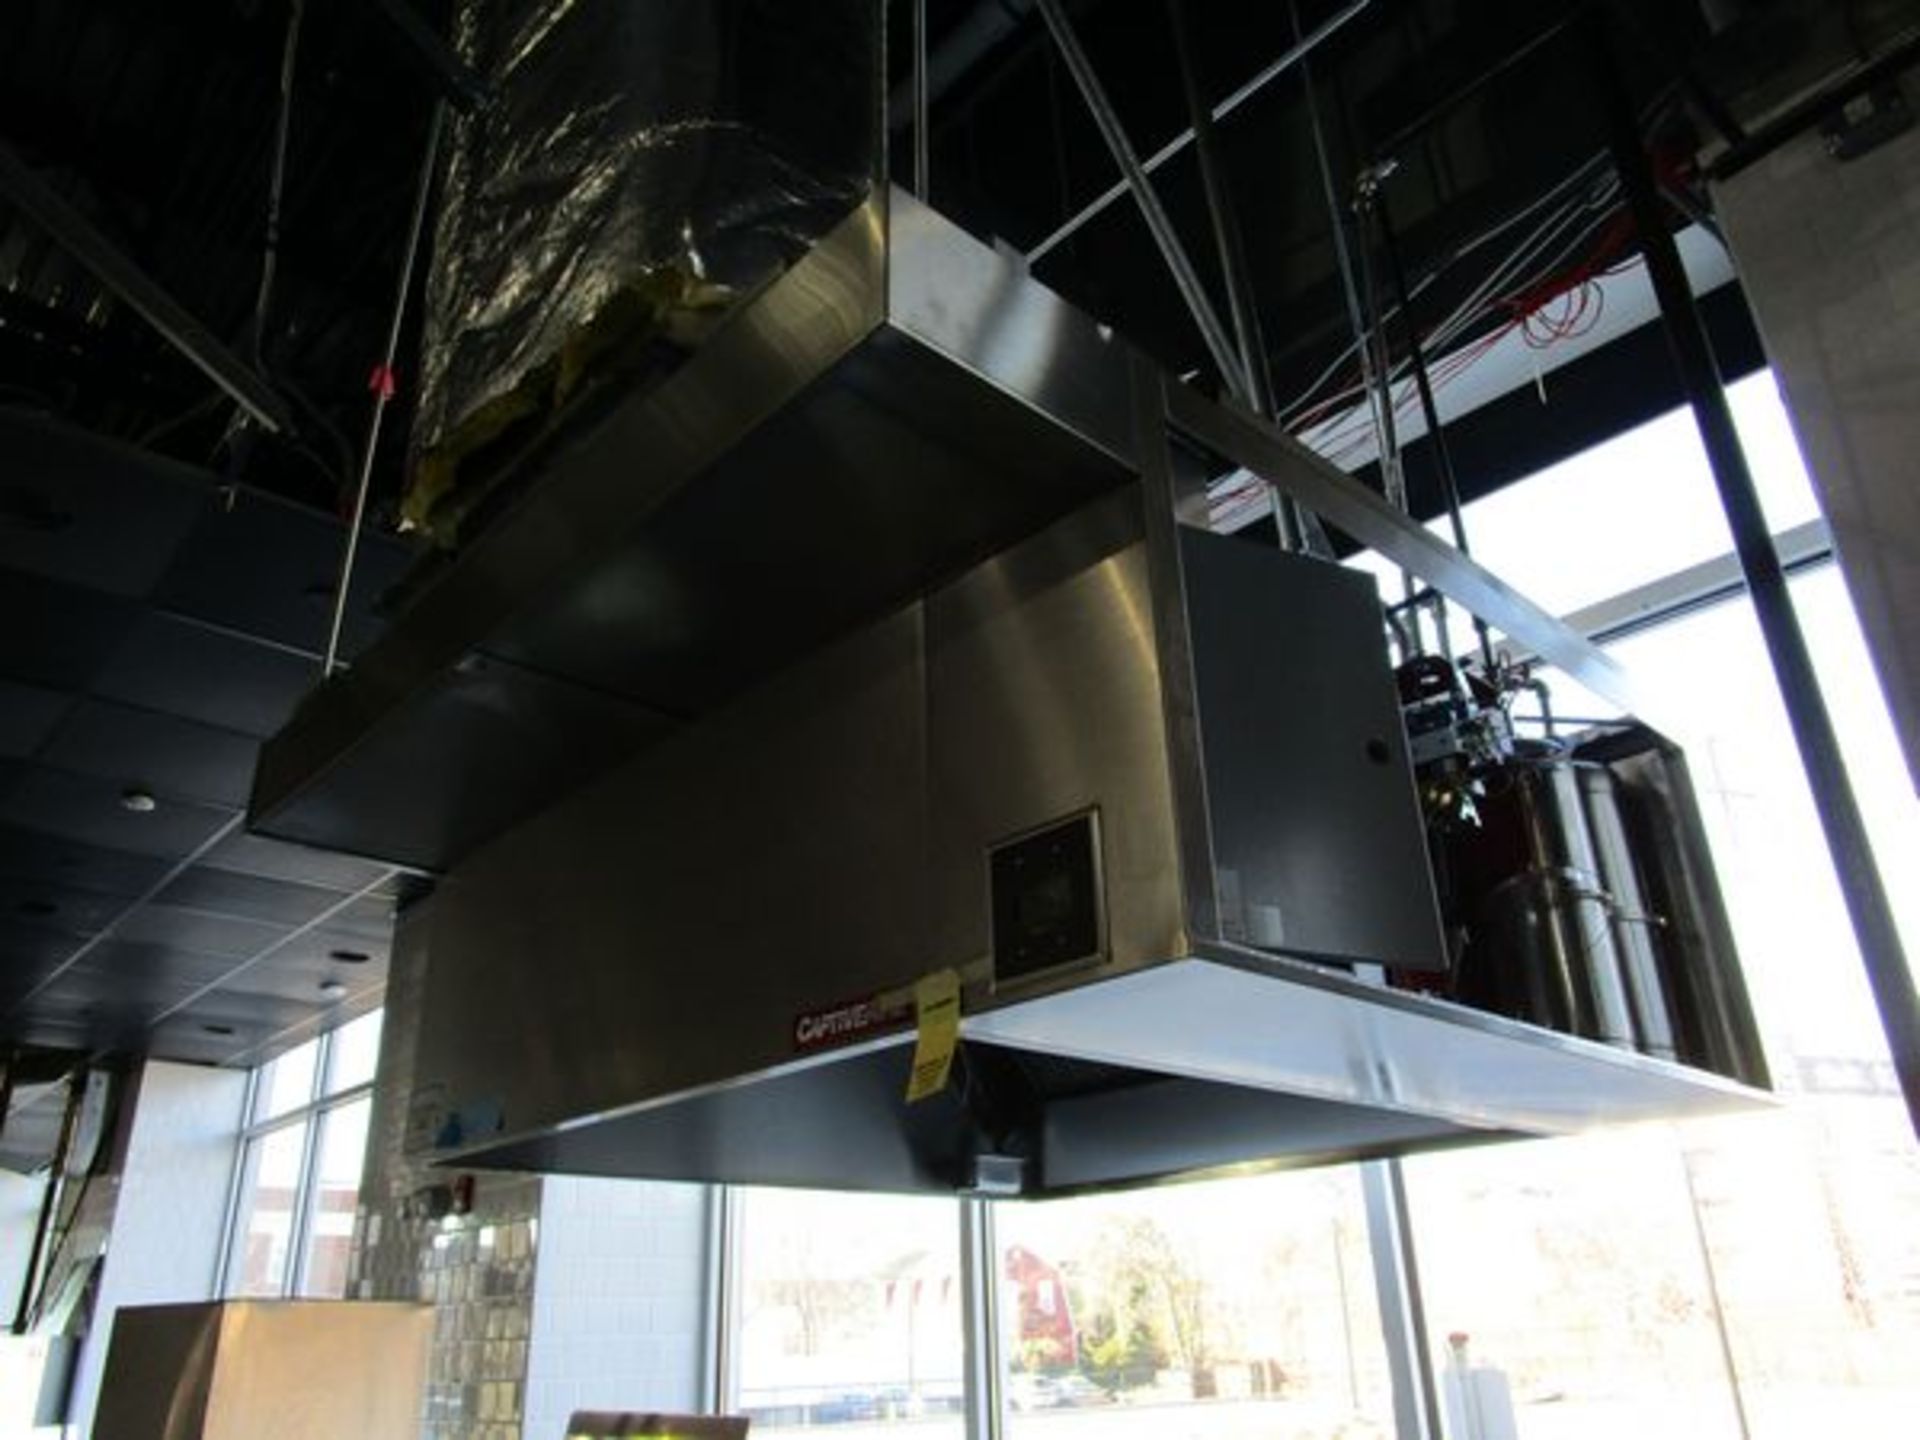 Captive Aire Exhaust Hoods, Approx. 4'x5' Each w/ Fire System, Hood Only, No Exhaust Blower